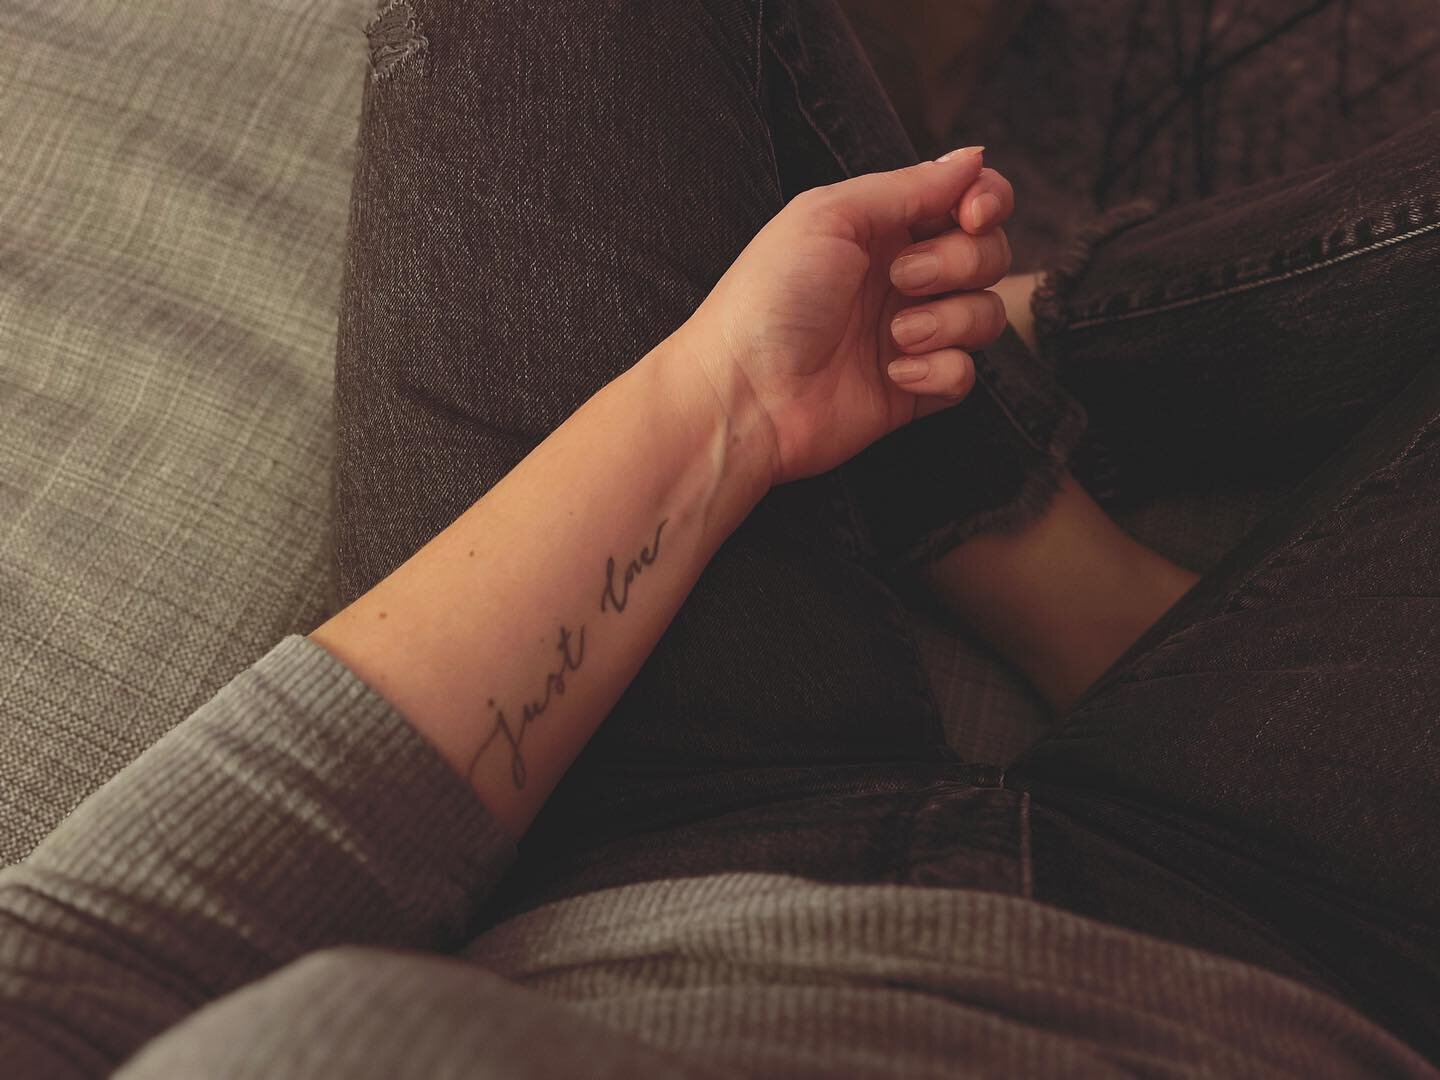 The tattoo that got my hand lettering love started &mdash; ten years ago! It&rsquo;s a bit faded now and I would definitely design it differently now, but I love it all the same. #justlove